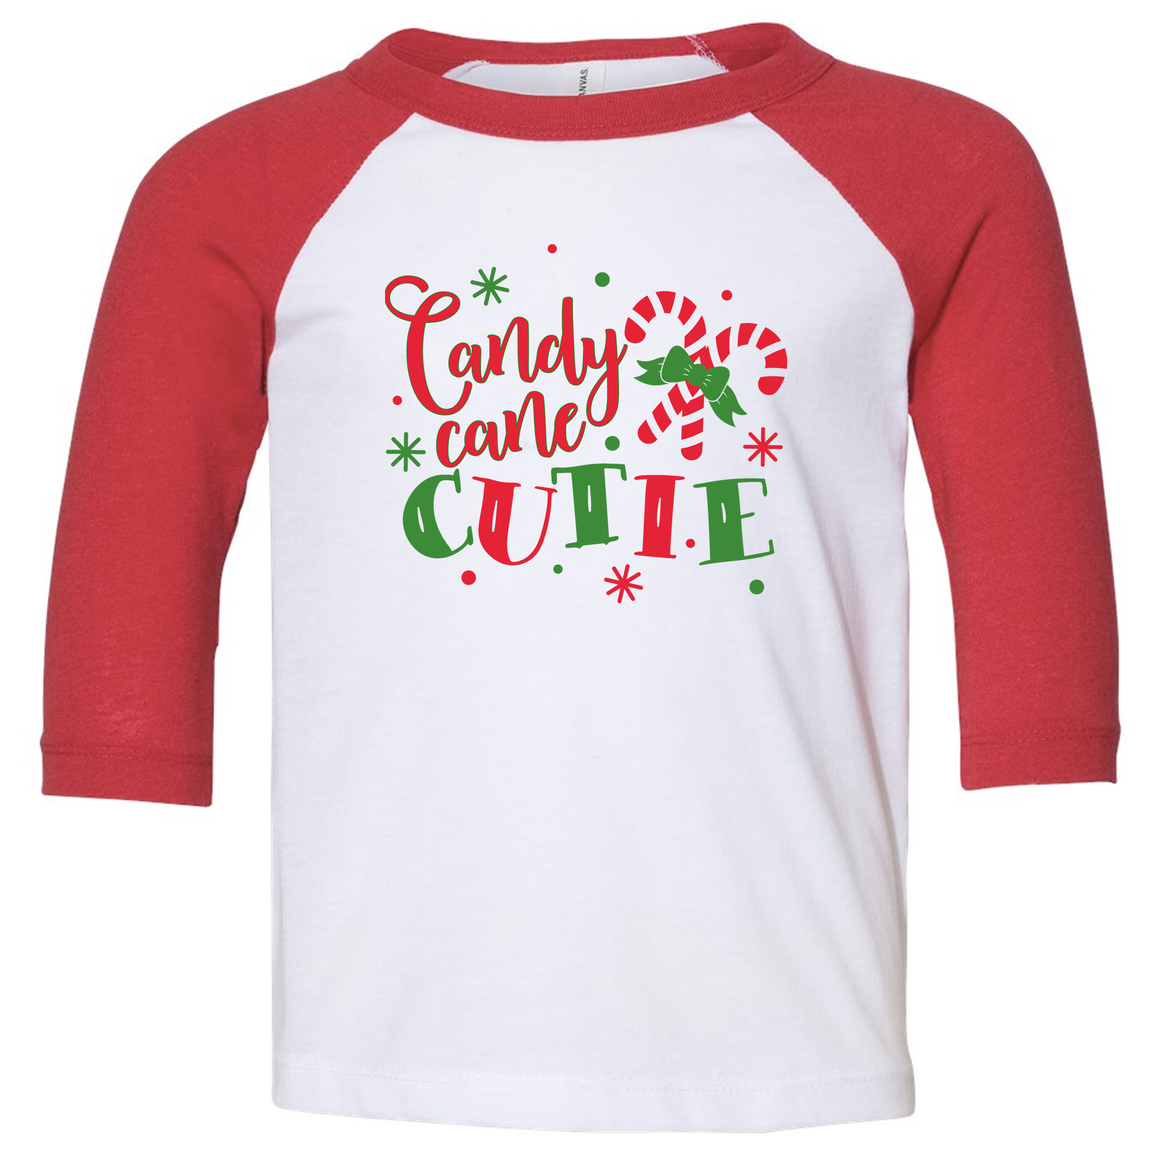 Candy Cane Cutie 3/4 Sleeve Baseball Tee (Toddler and Youth)